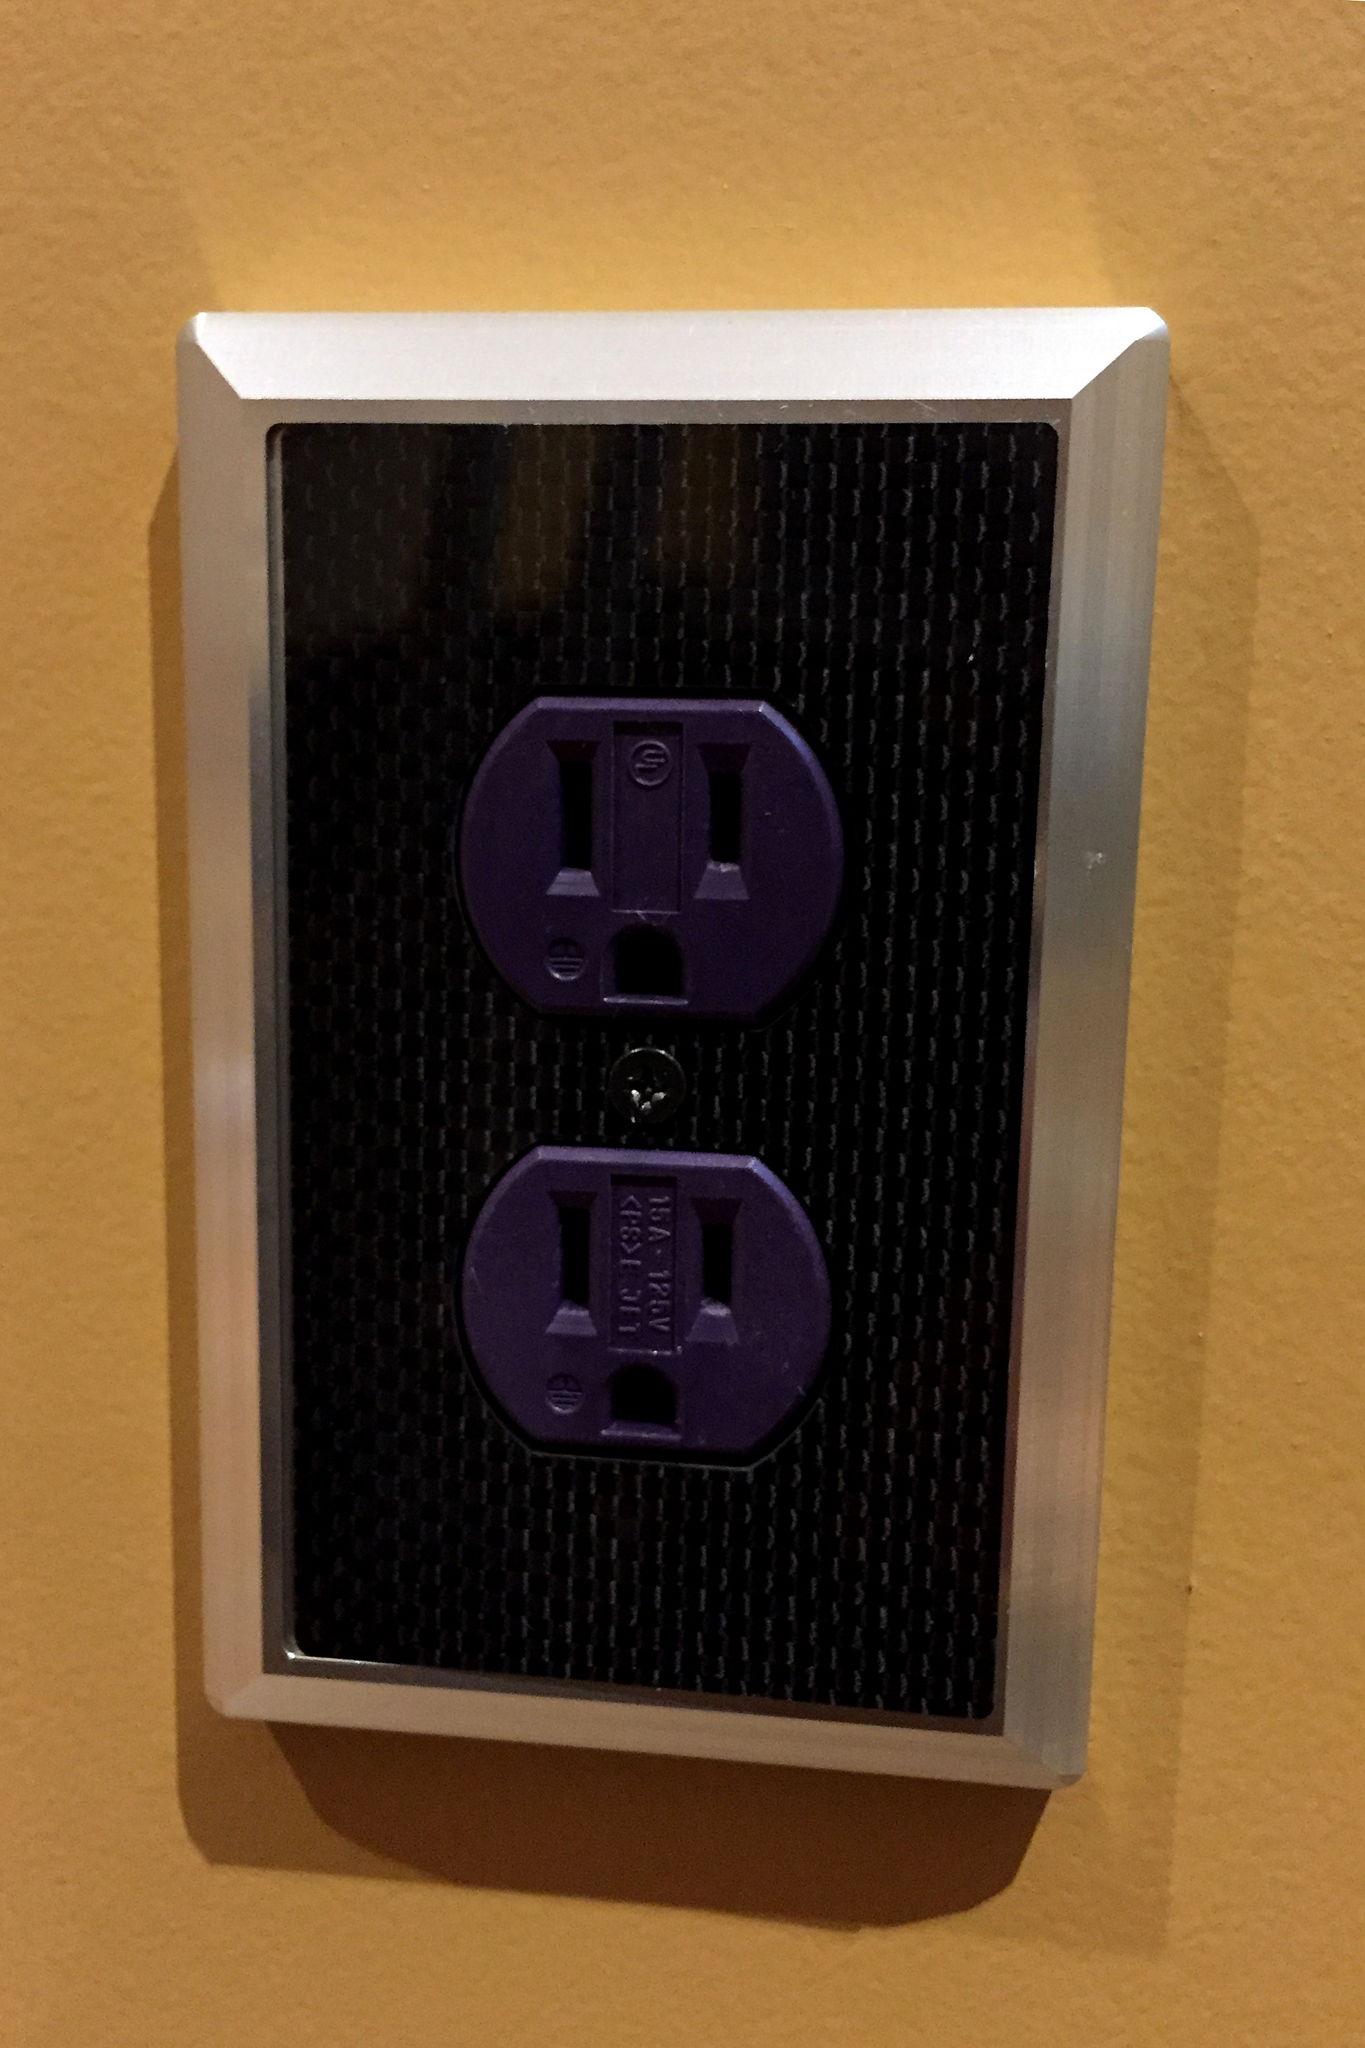 Power outlet receptacle for digital components.